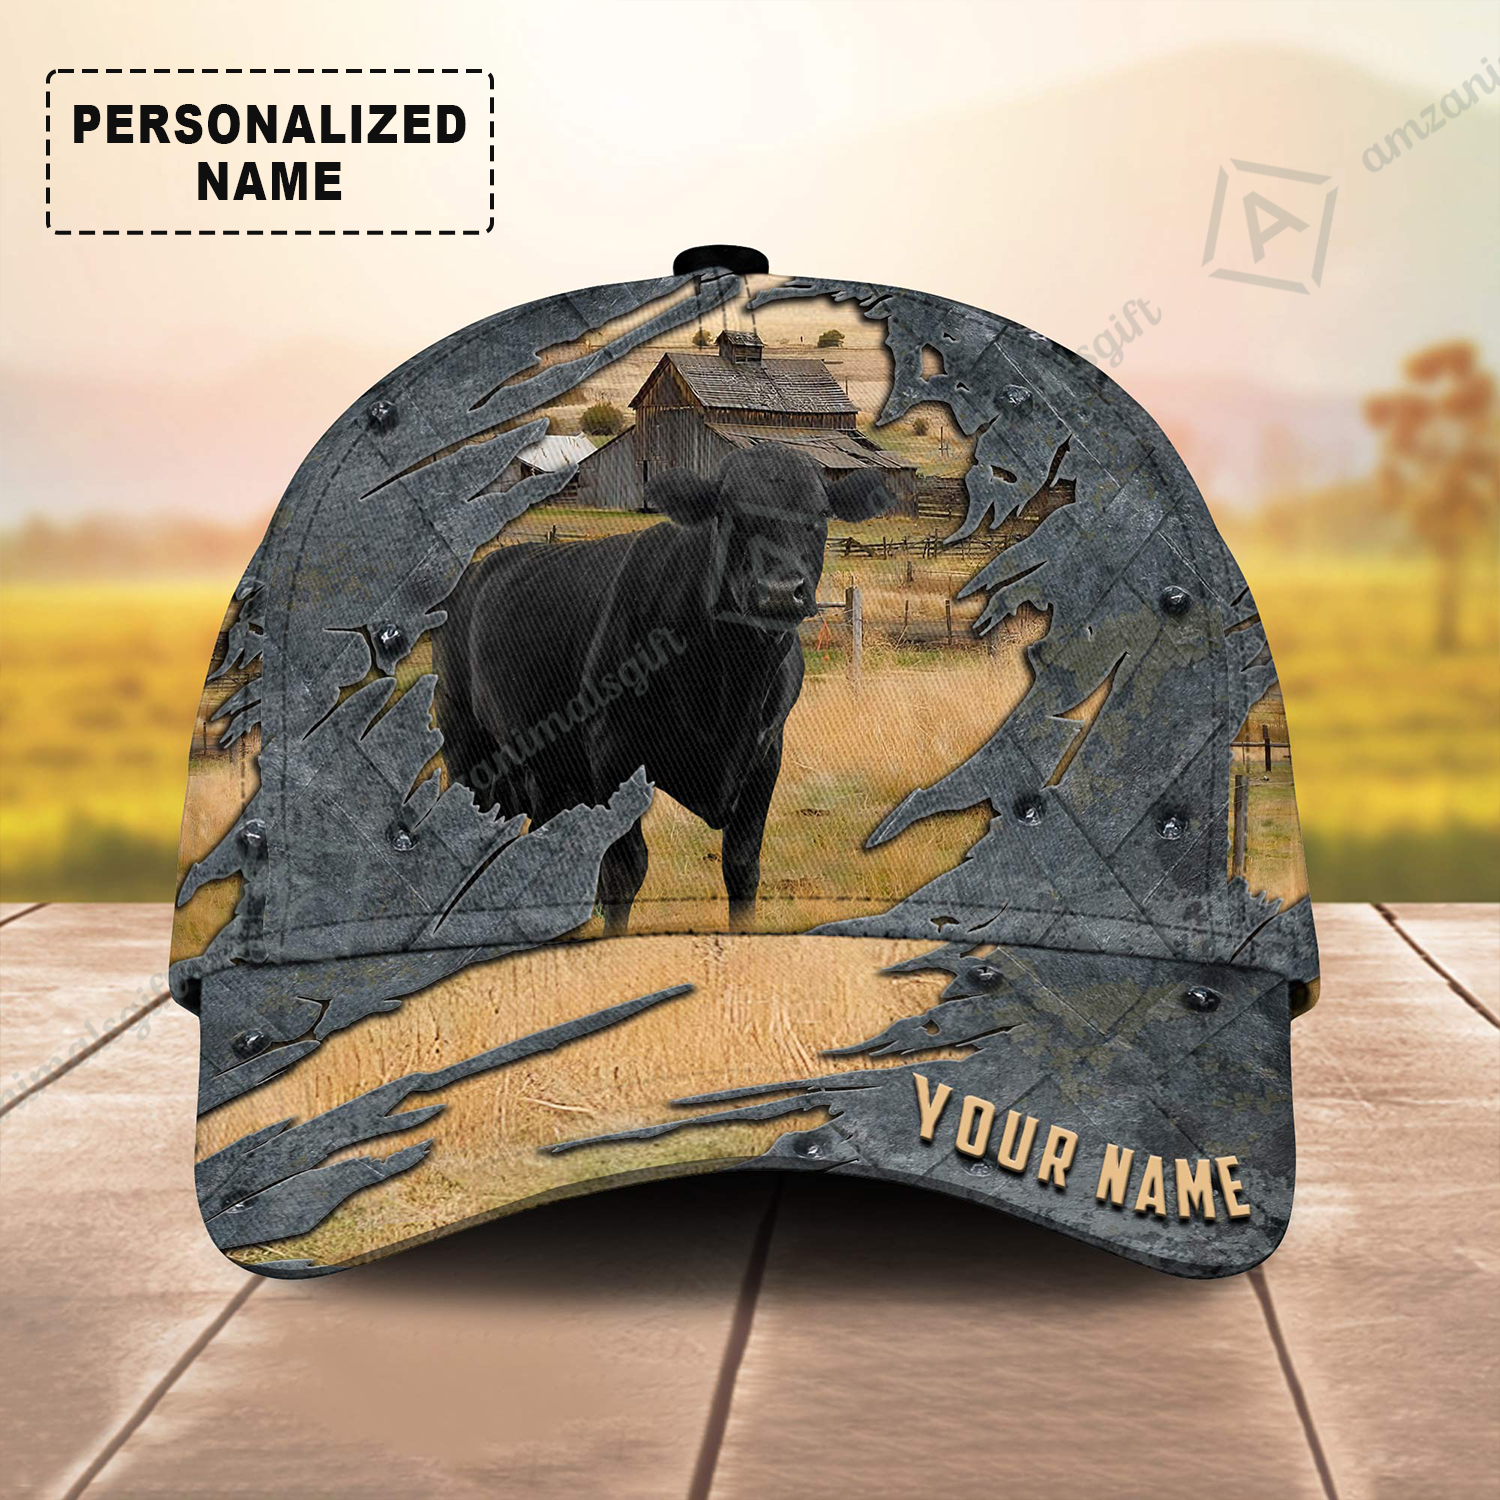 Customized Name Black Angus On The Farm Cap, Personalized Farm Hats For Friend, Family, Farmers, Black Angus Lovers